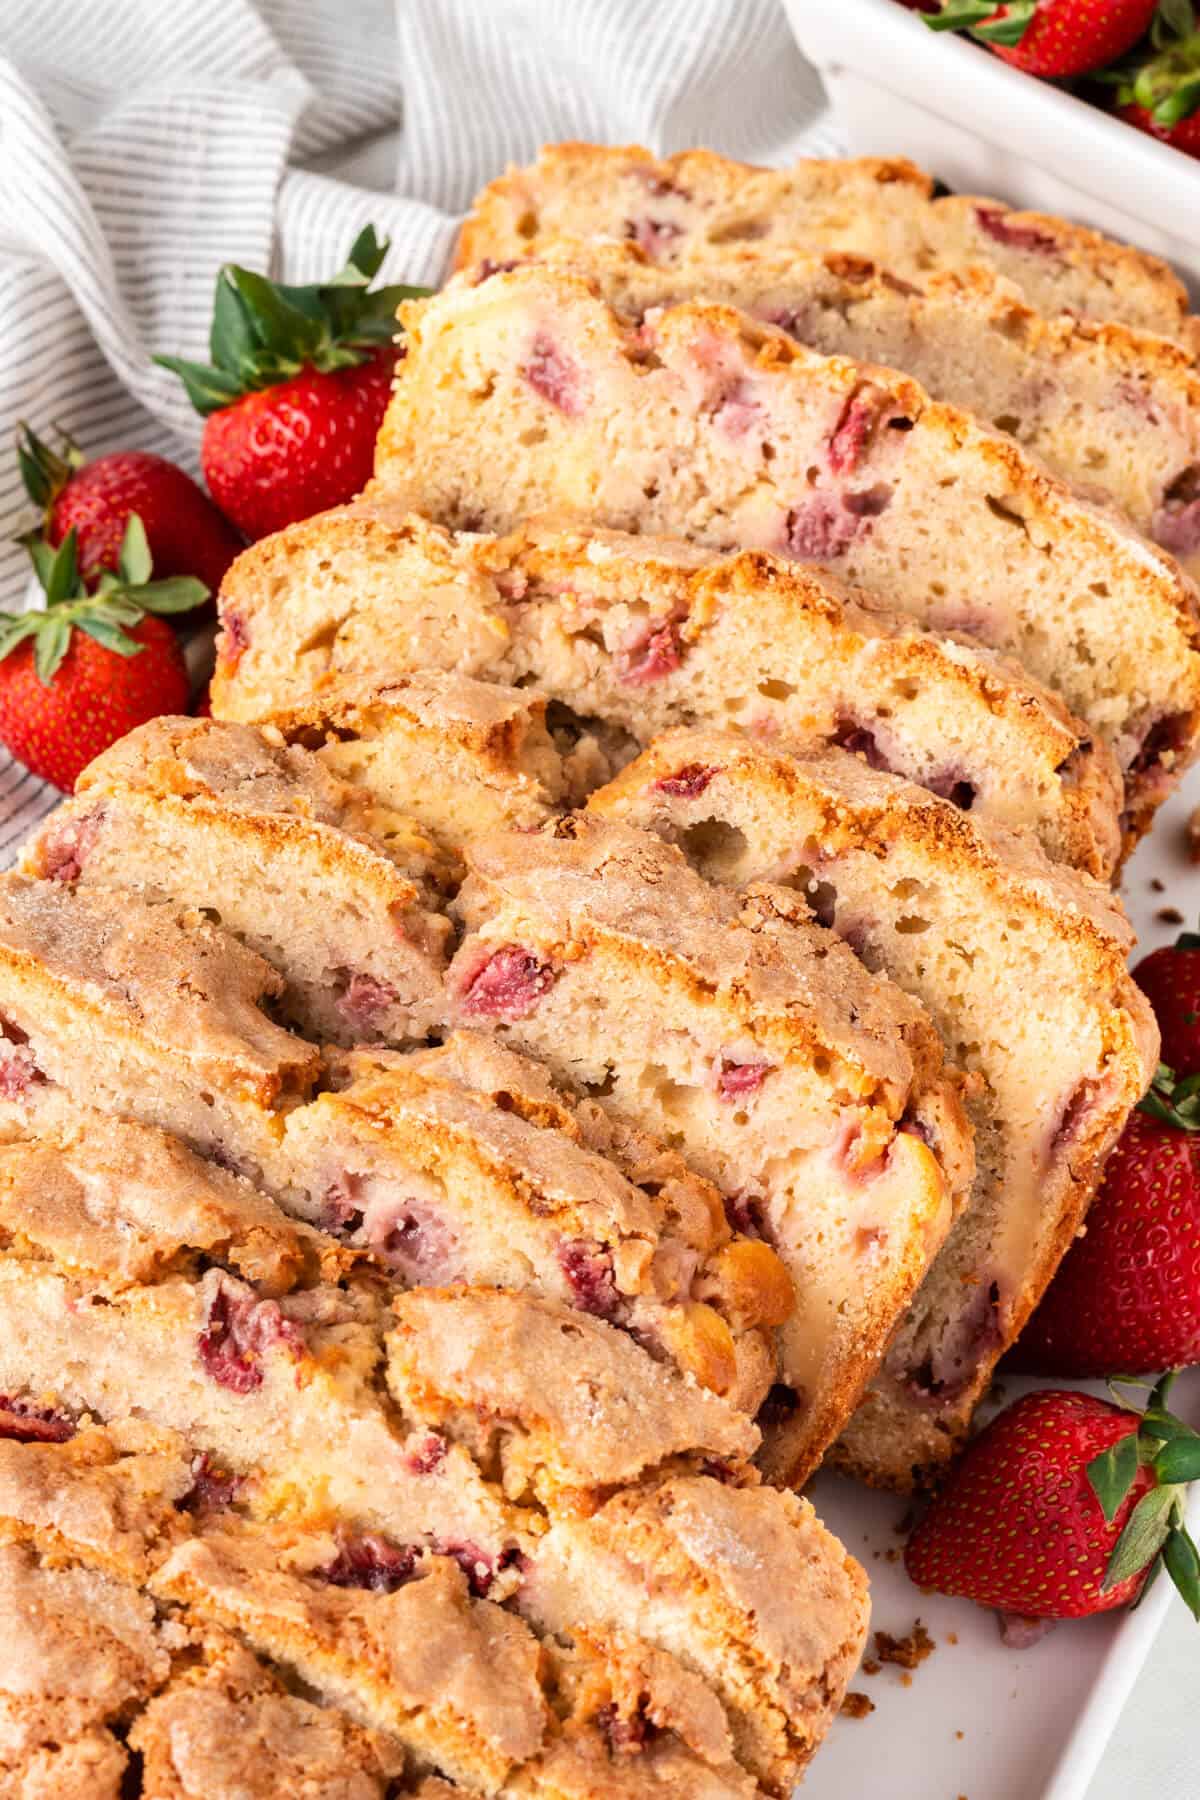 Strawberry bread sliced on a platter.